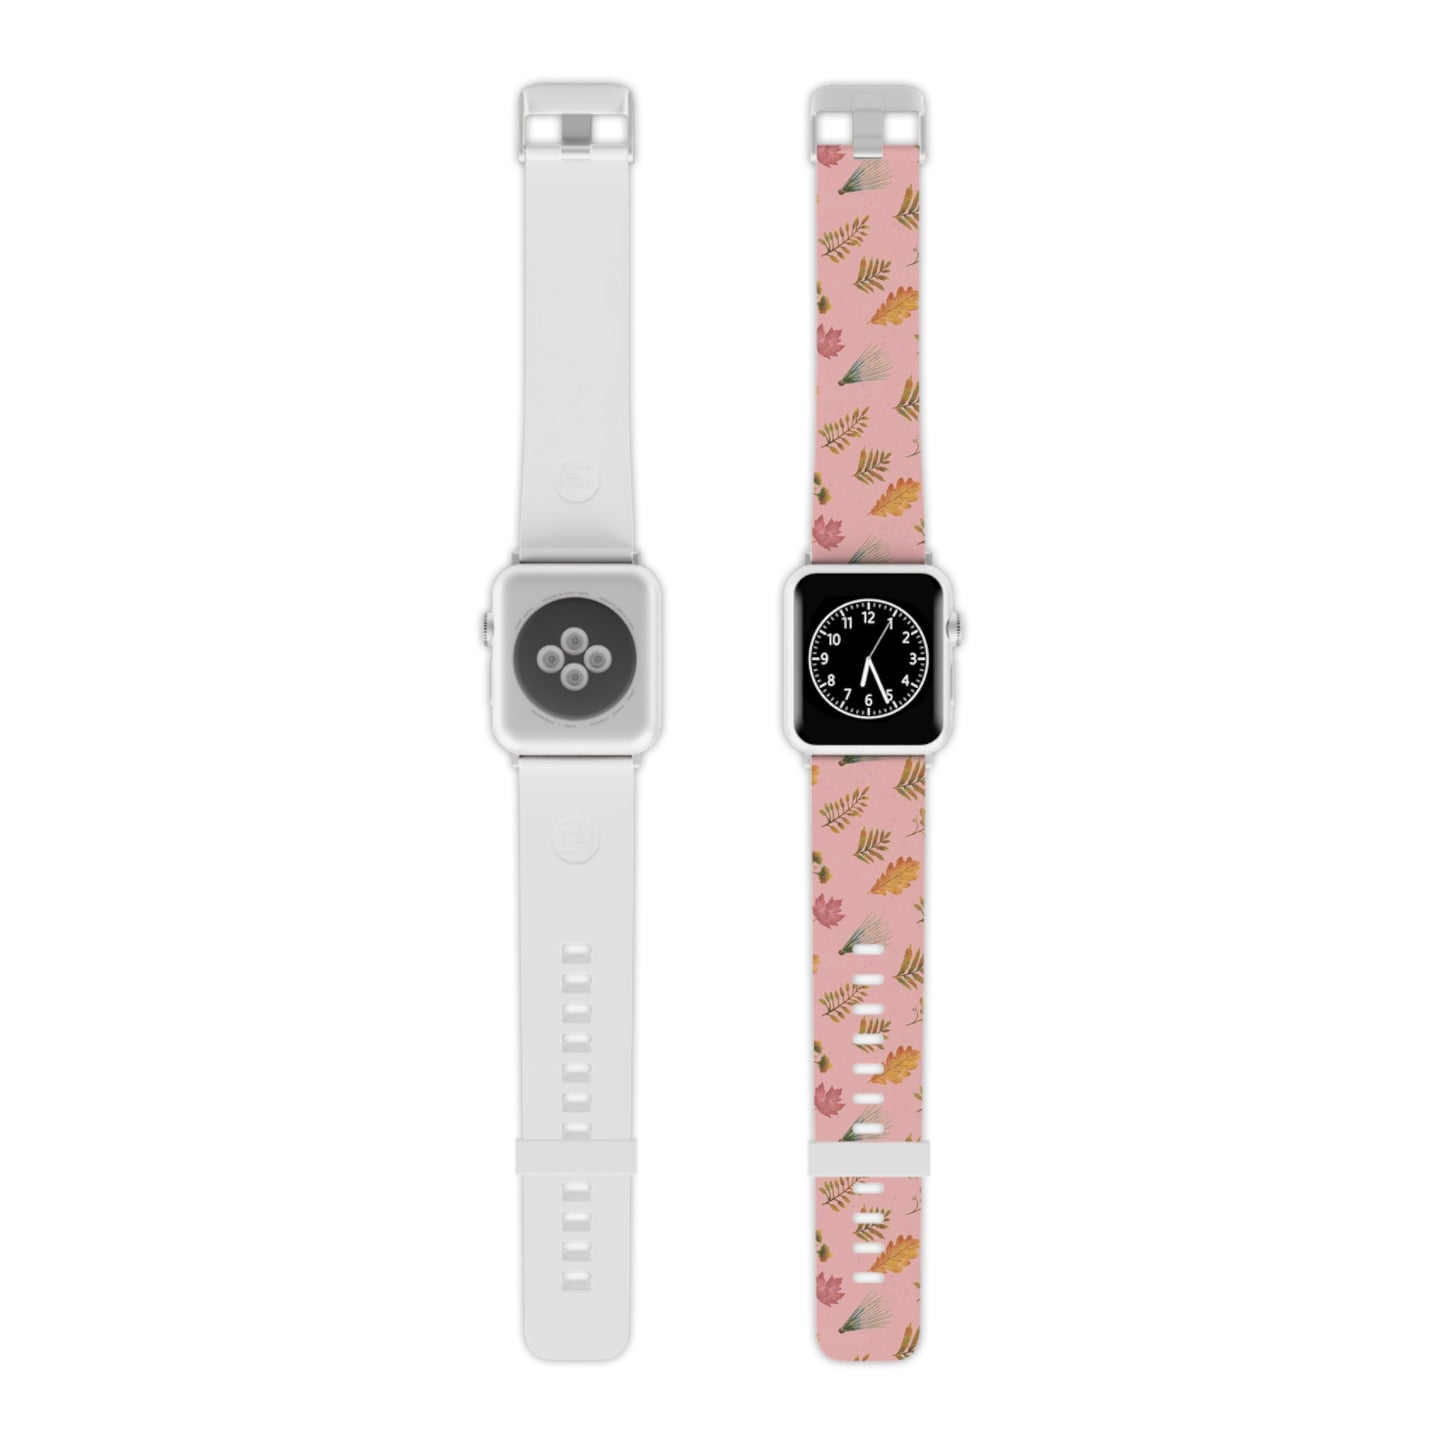 Autumn Leaves Watch Band for Apple Watch